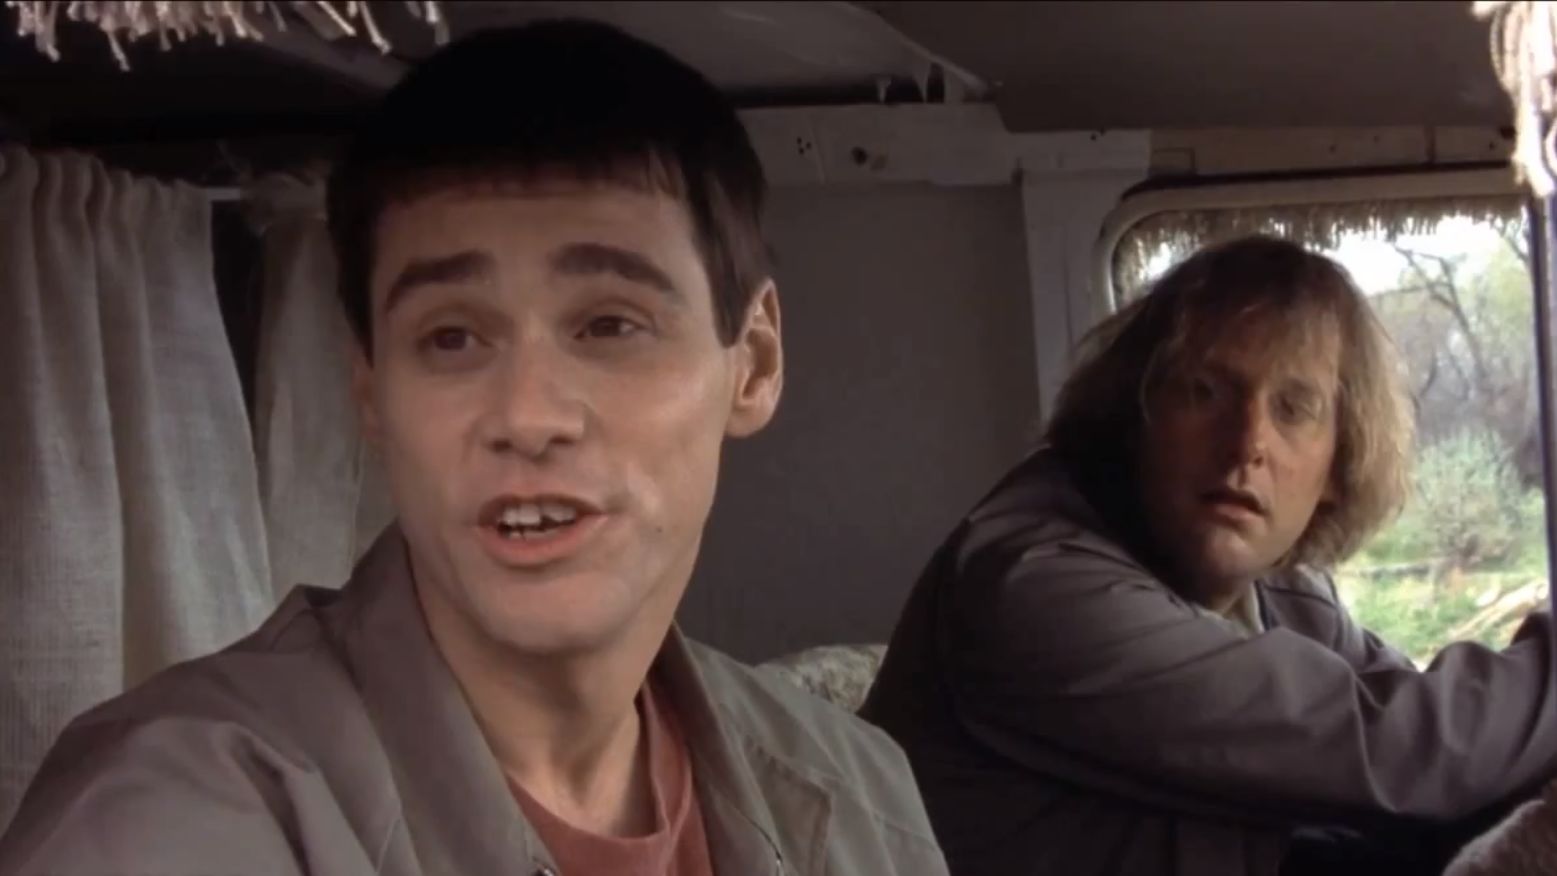 A still from the 1994 movie "Dumb and Dumber" with Jim Carrey (left) and Jeff Daniels.